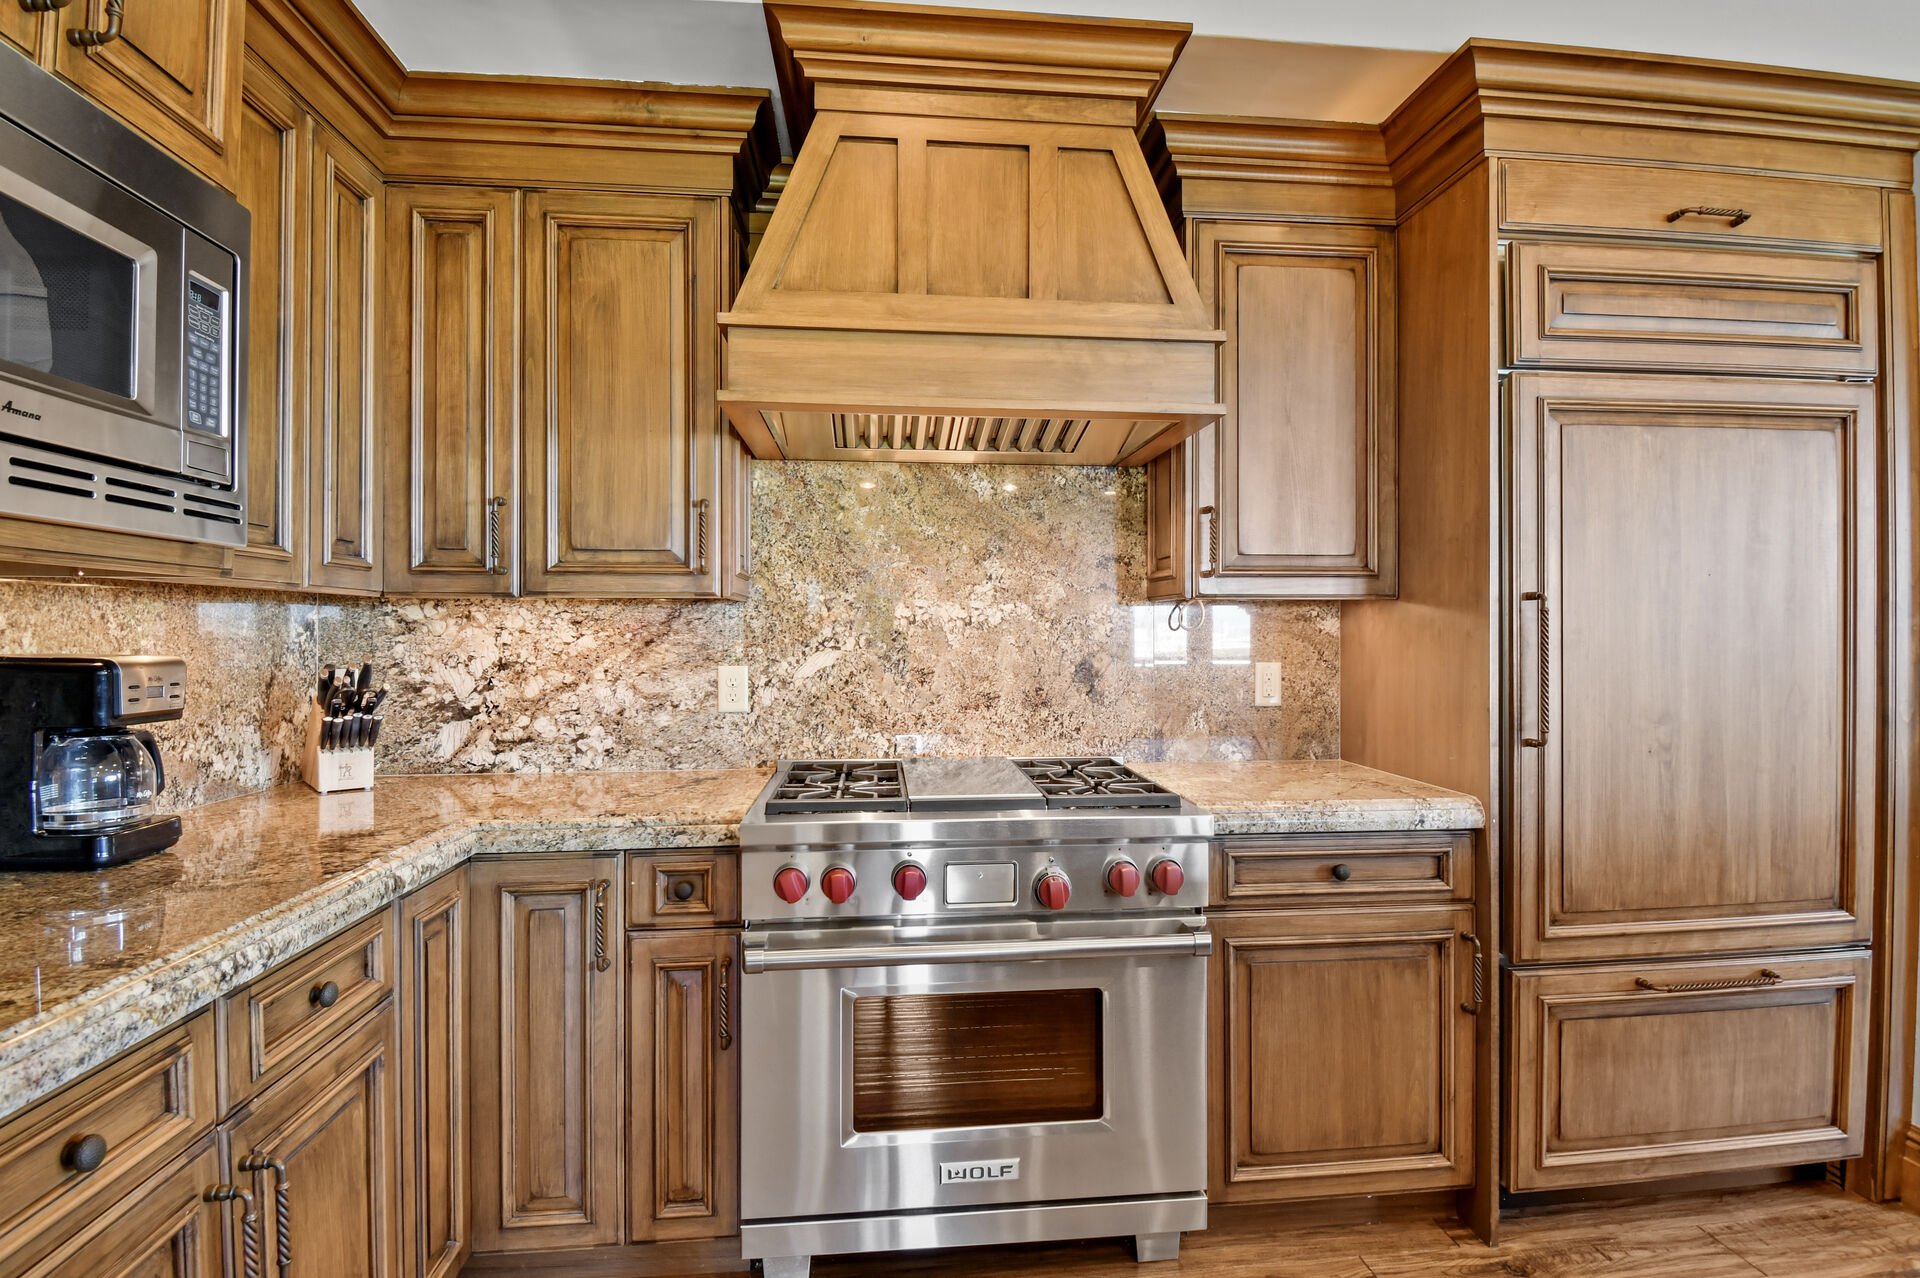 High end stainless steel appliances throughout the kitchen